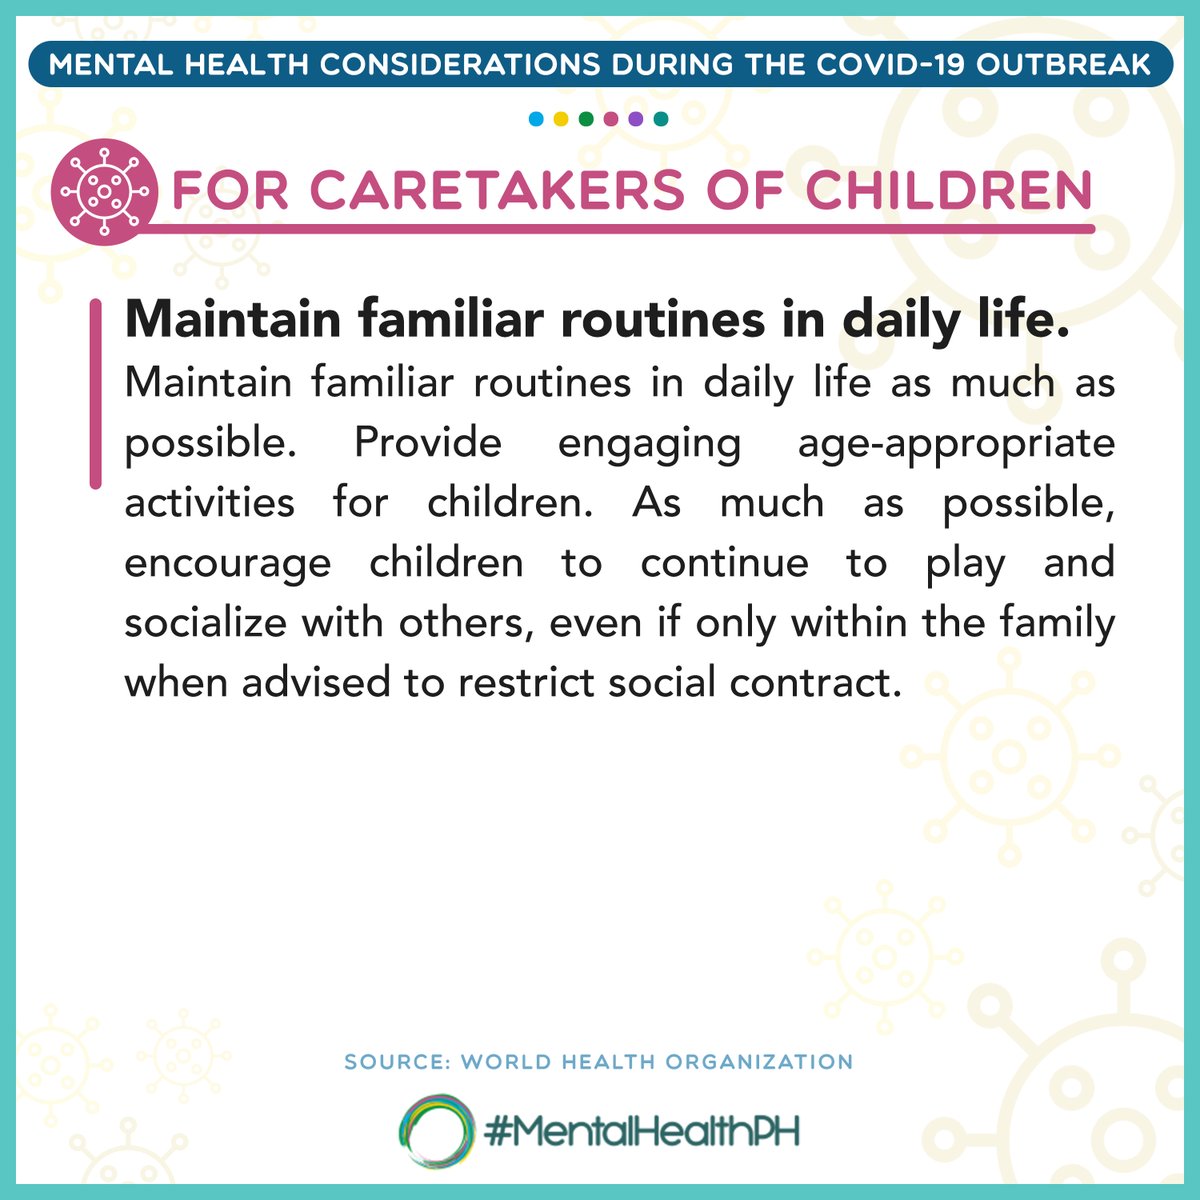 [Mental Health Considerations during COVID-19 Outbreak]For Caretakers of Children #MentalHealthPH  #COVID19(Source:  @WHO) @WHOPhilippines  @gospeakyourmind  @UnitedGMH